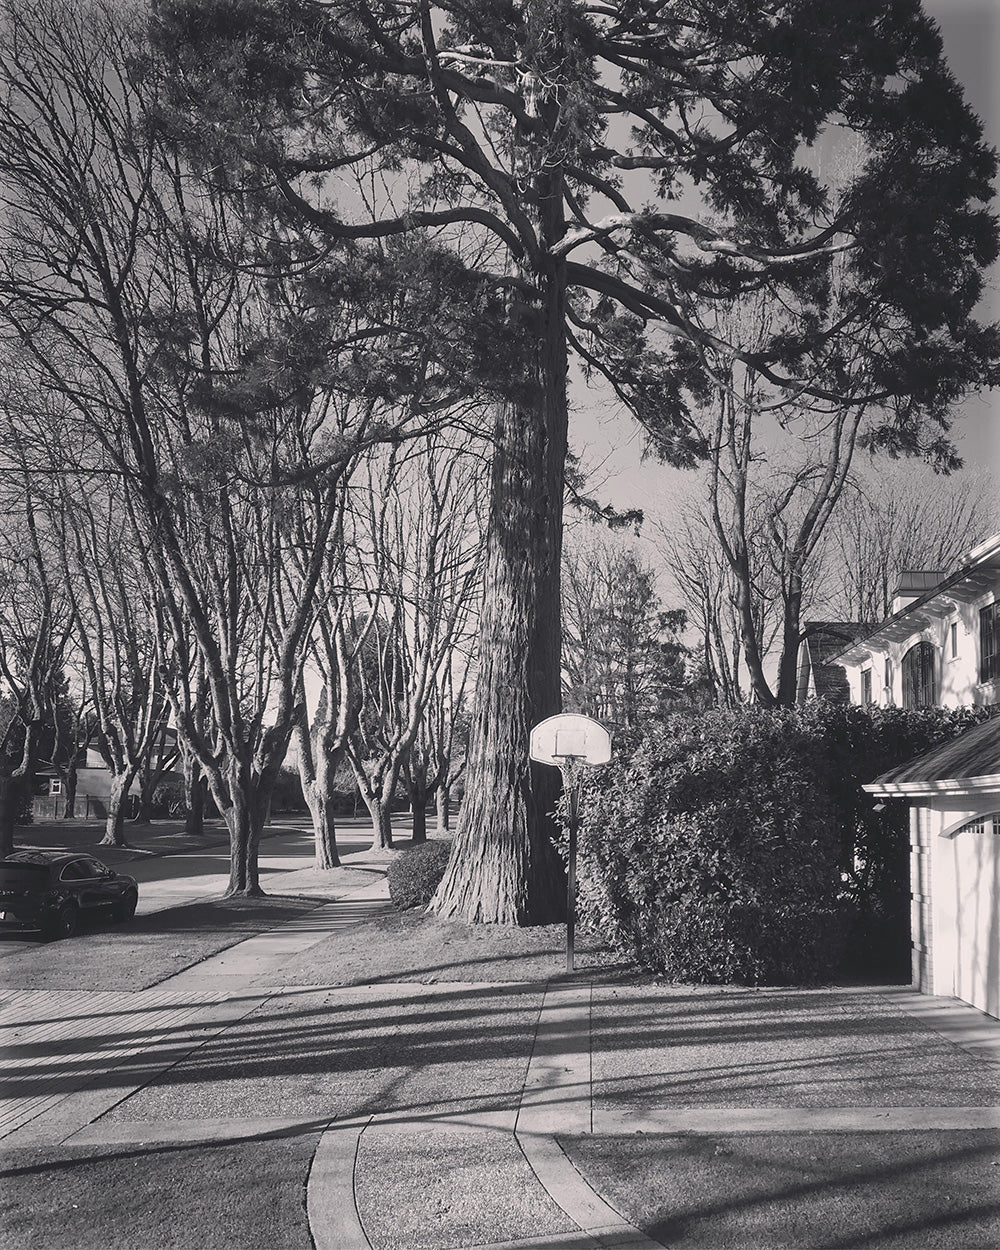 SPITGAN WEBZINE #3 Photo 5. Black and white photo of basketball court in Kerrisdale area and the impressive trees surrounding it. Vancouver BC